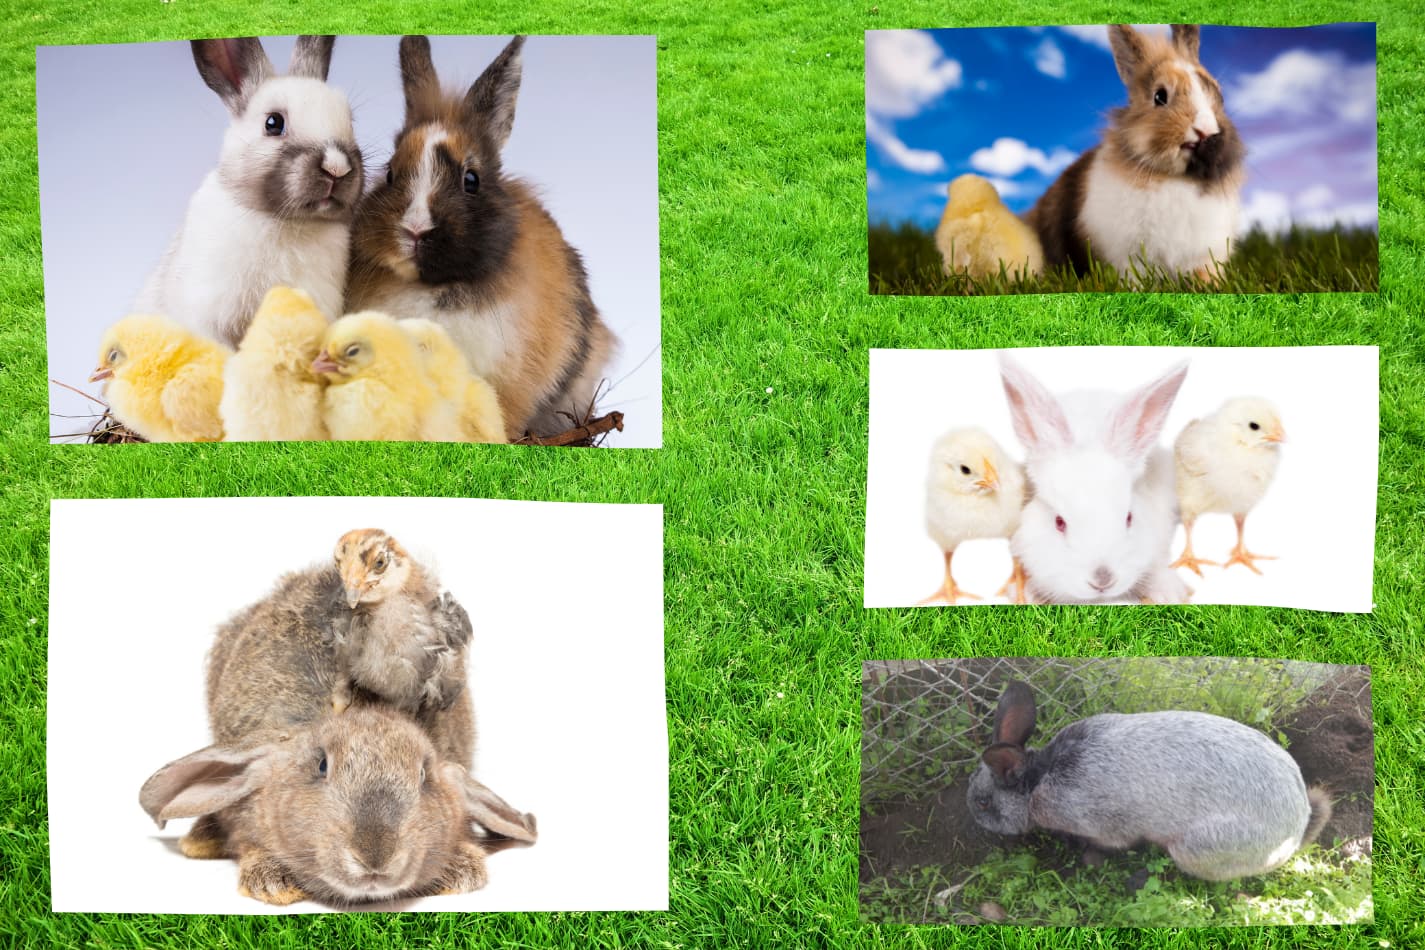 A collage of chickens and rabbits together in a grass background.